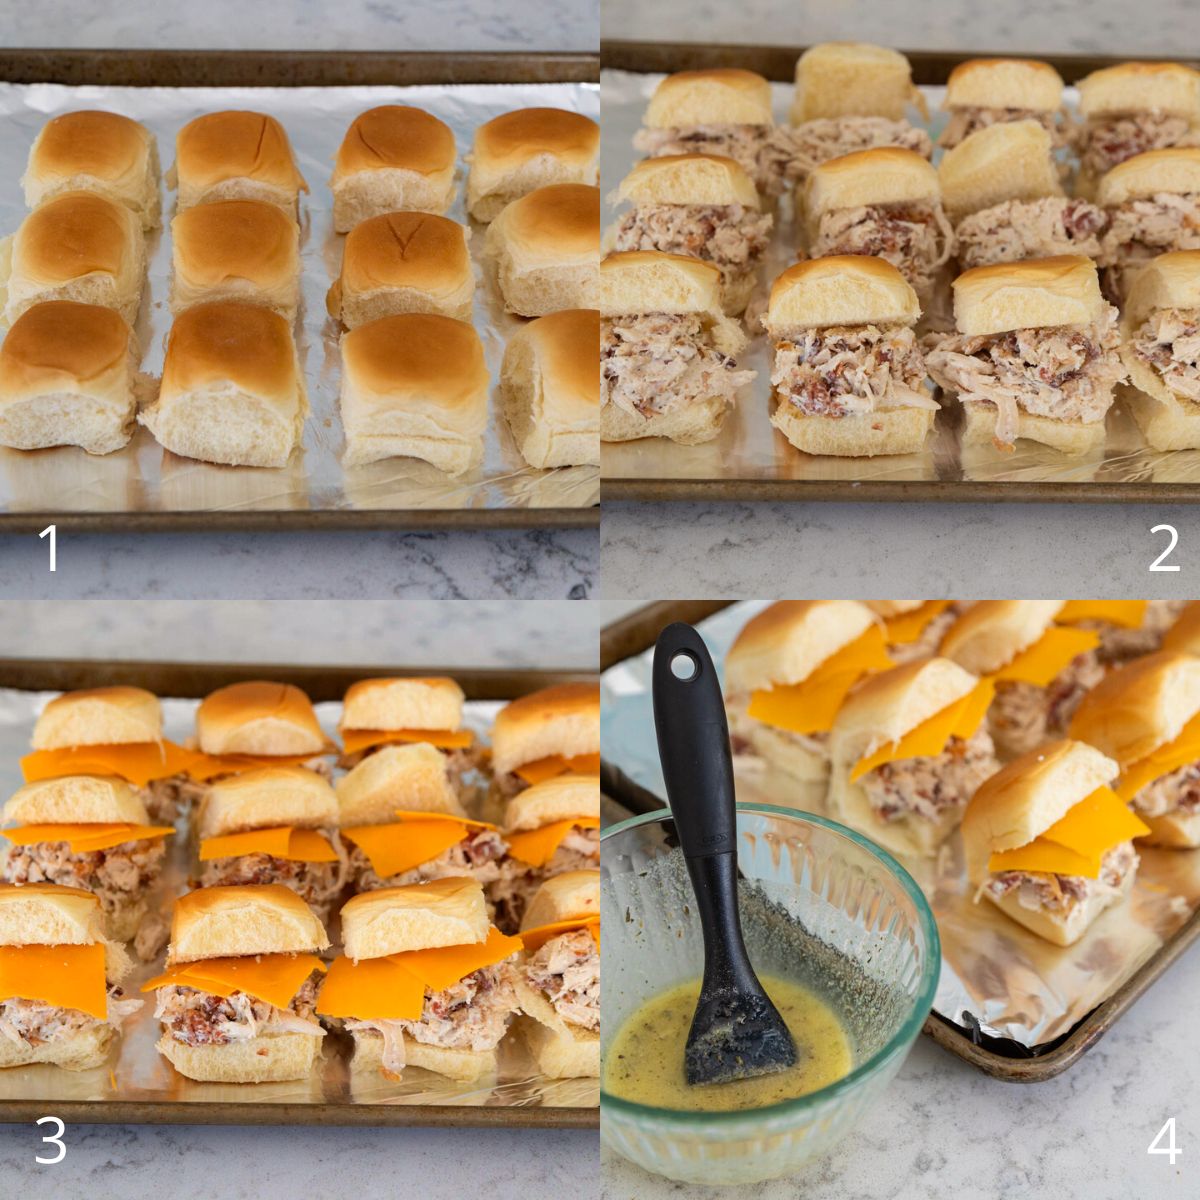 The step by step photo collage shows 4 steps to assemble the sliders for baking.